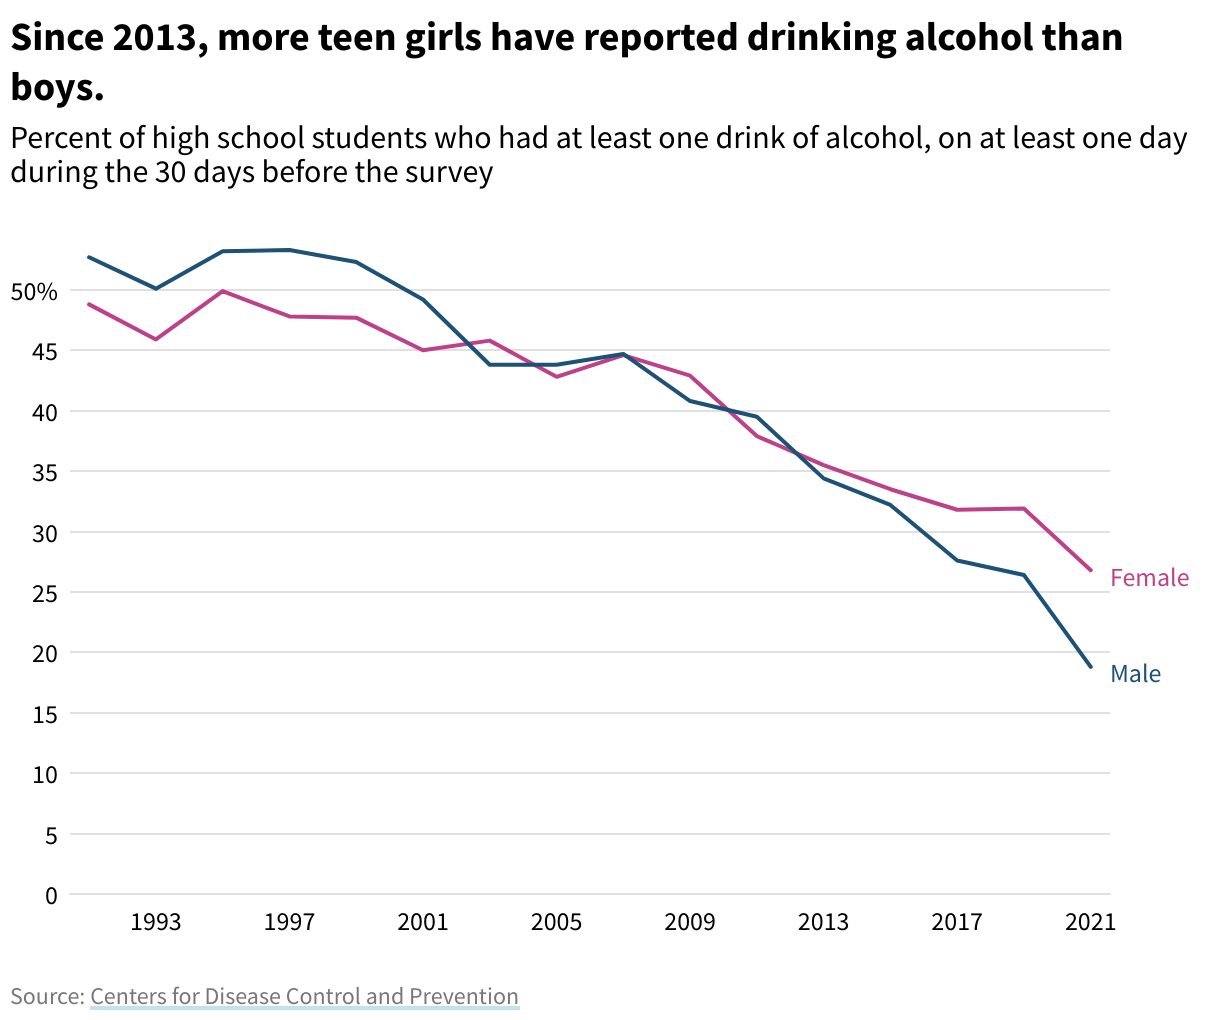 Line chart showing the percentage of teens boys and girls who report drinking alcohol from 1991 to 2021, with a general downward trend. 